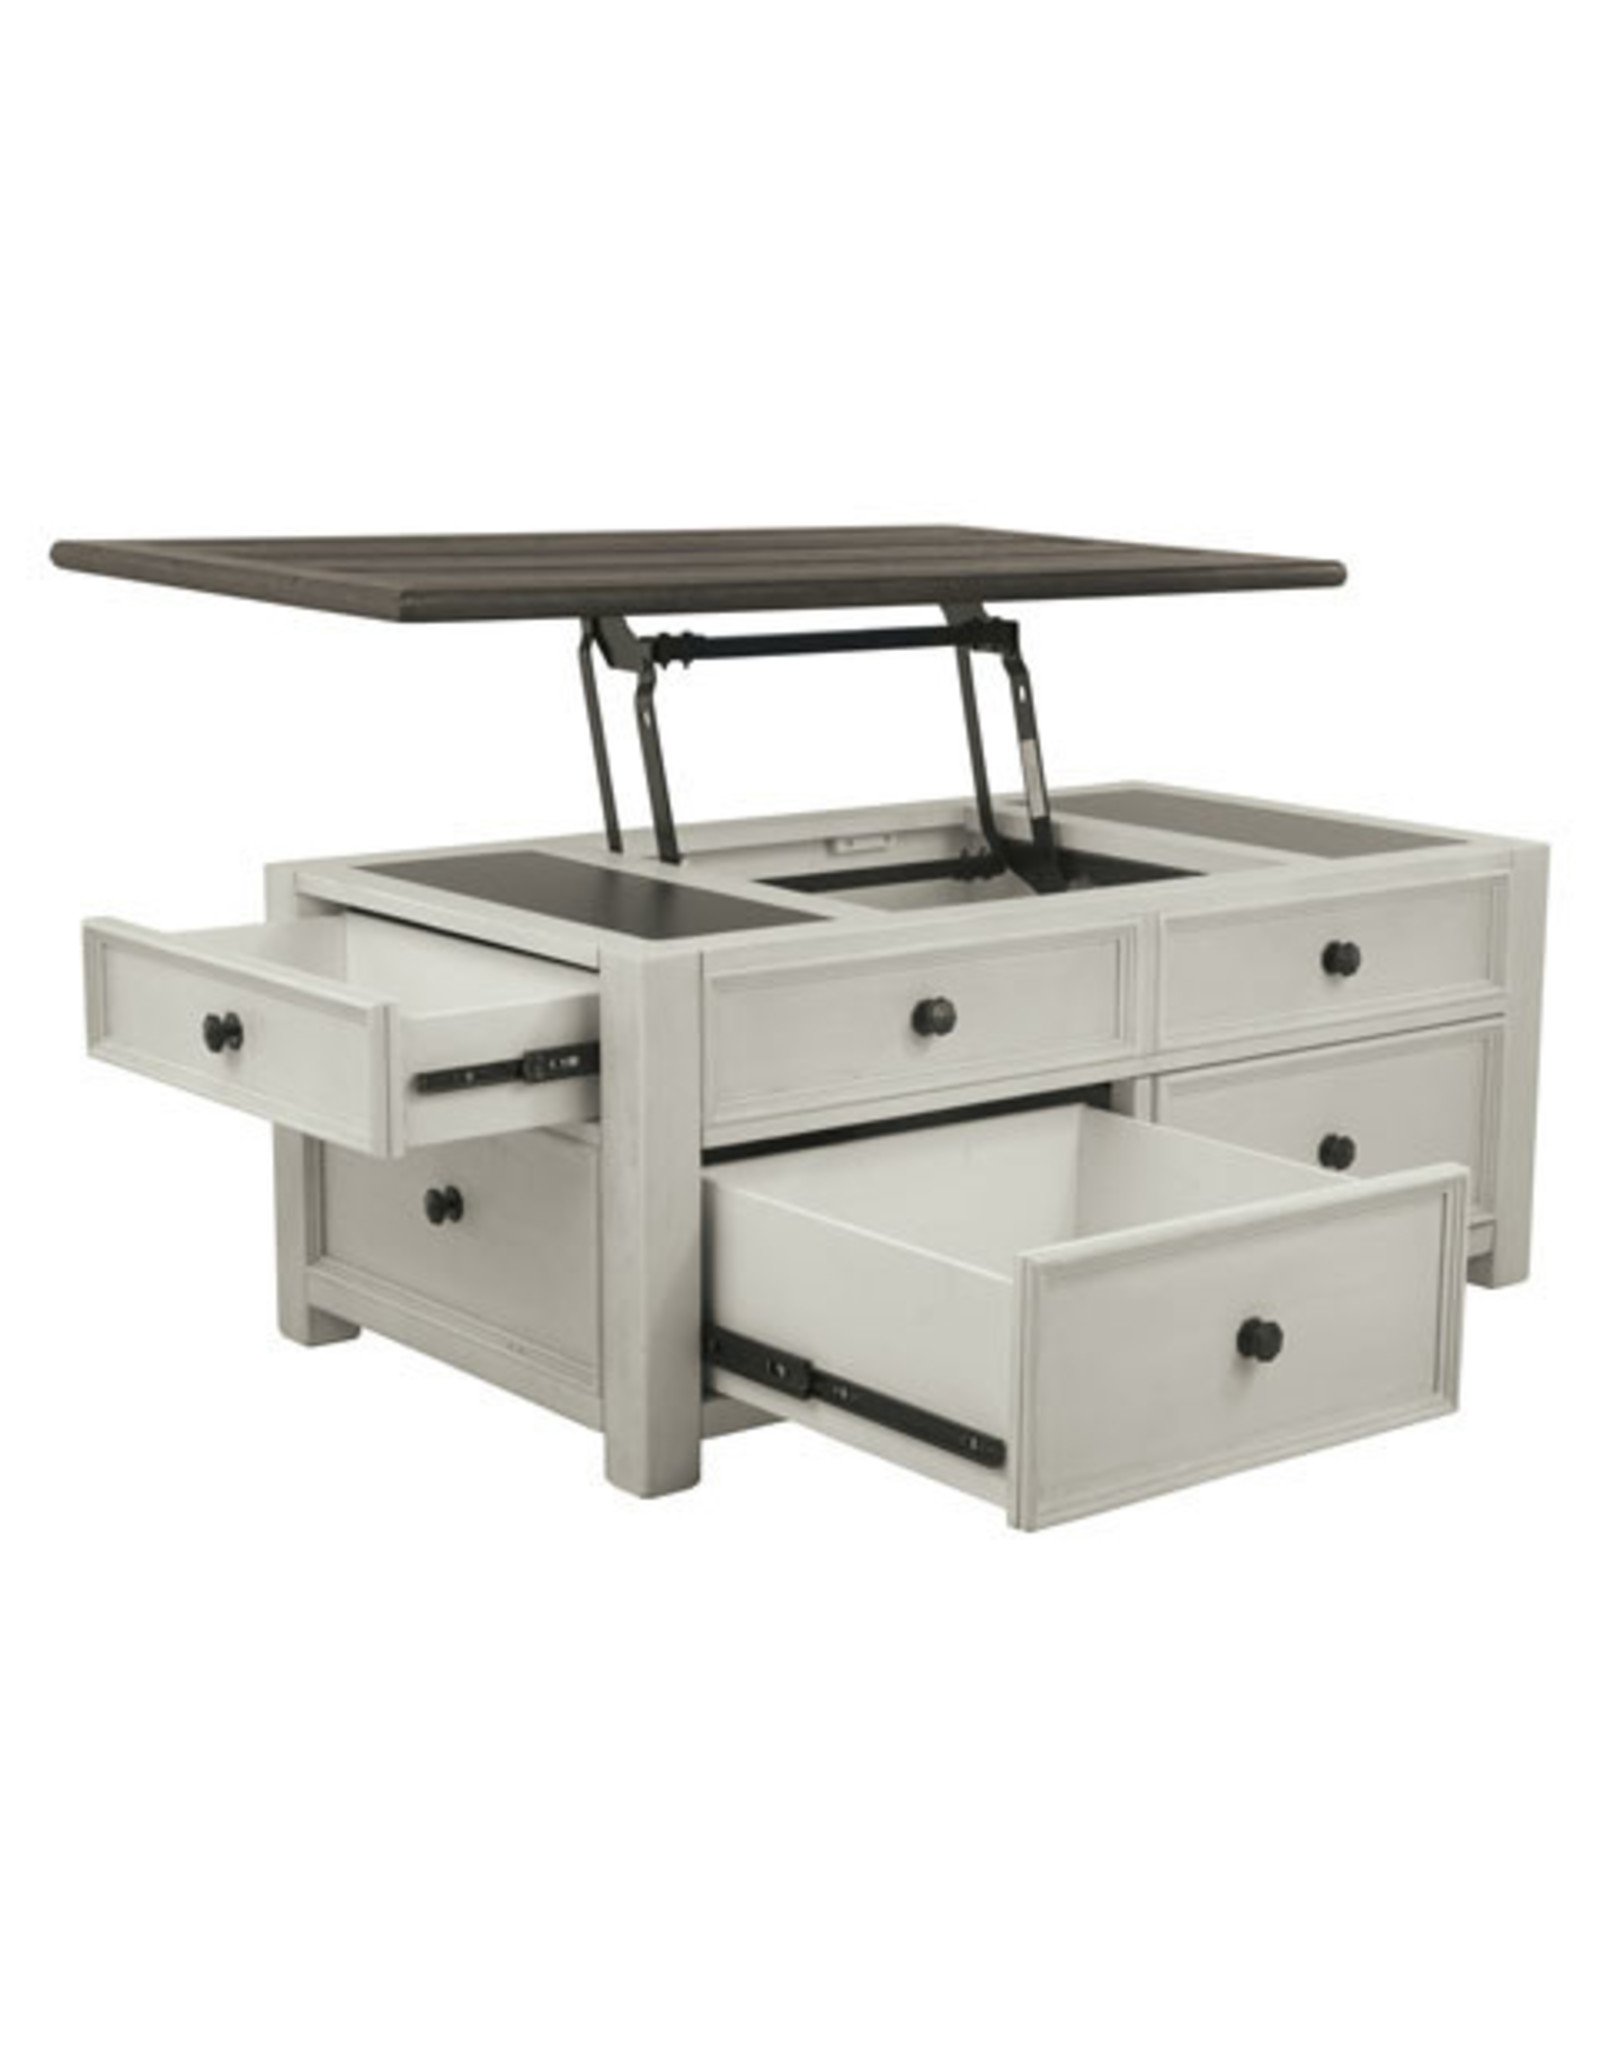 Bolanburg T637-20 Lift Top Cocktail Table